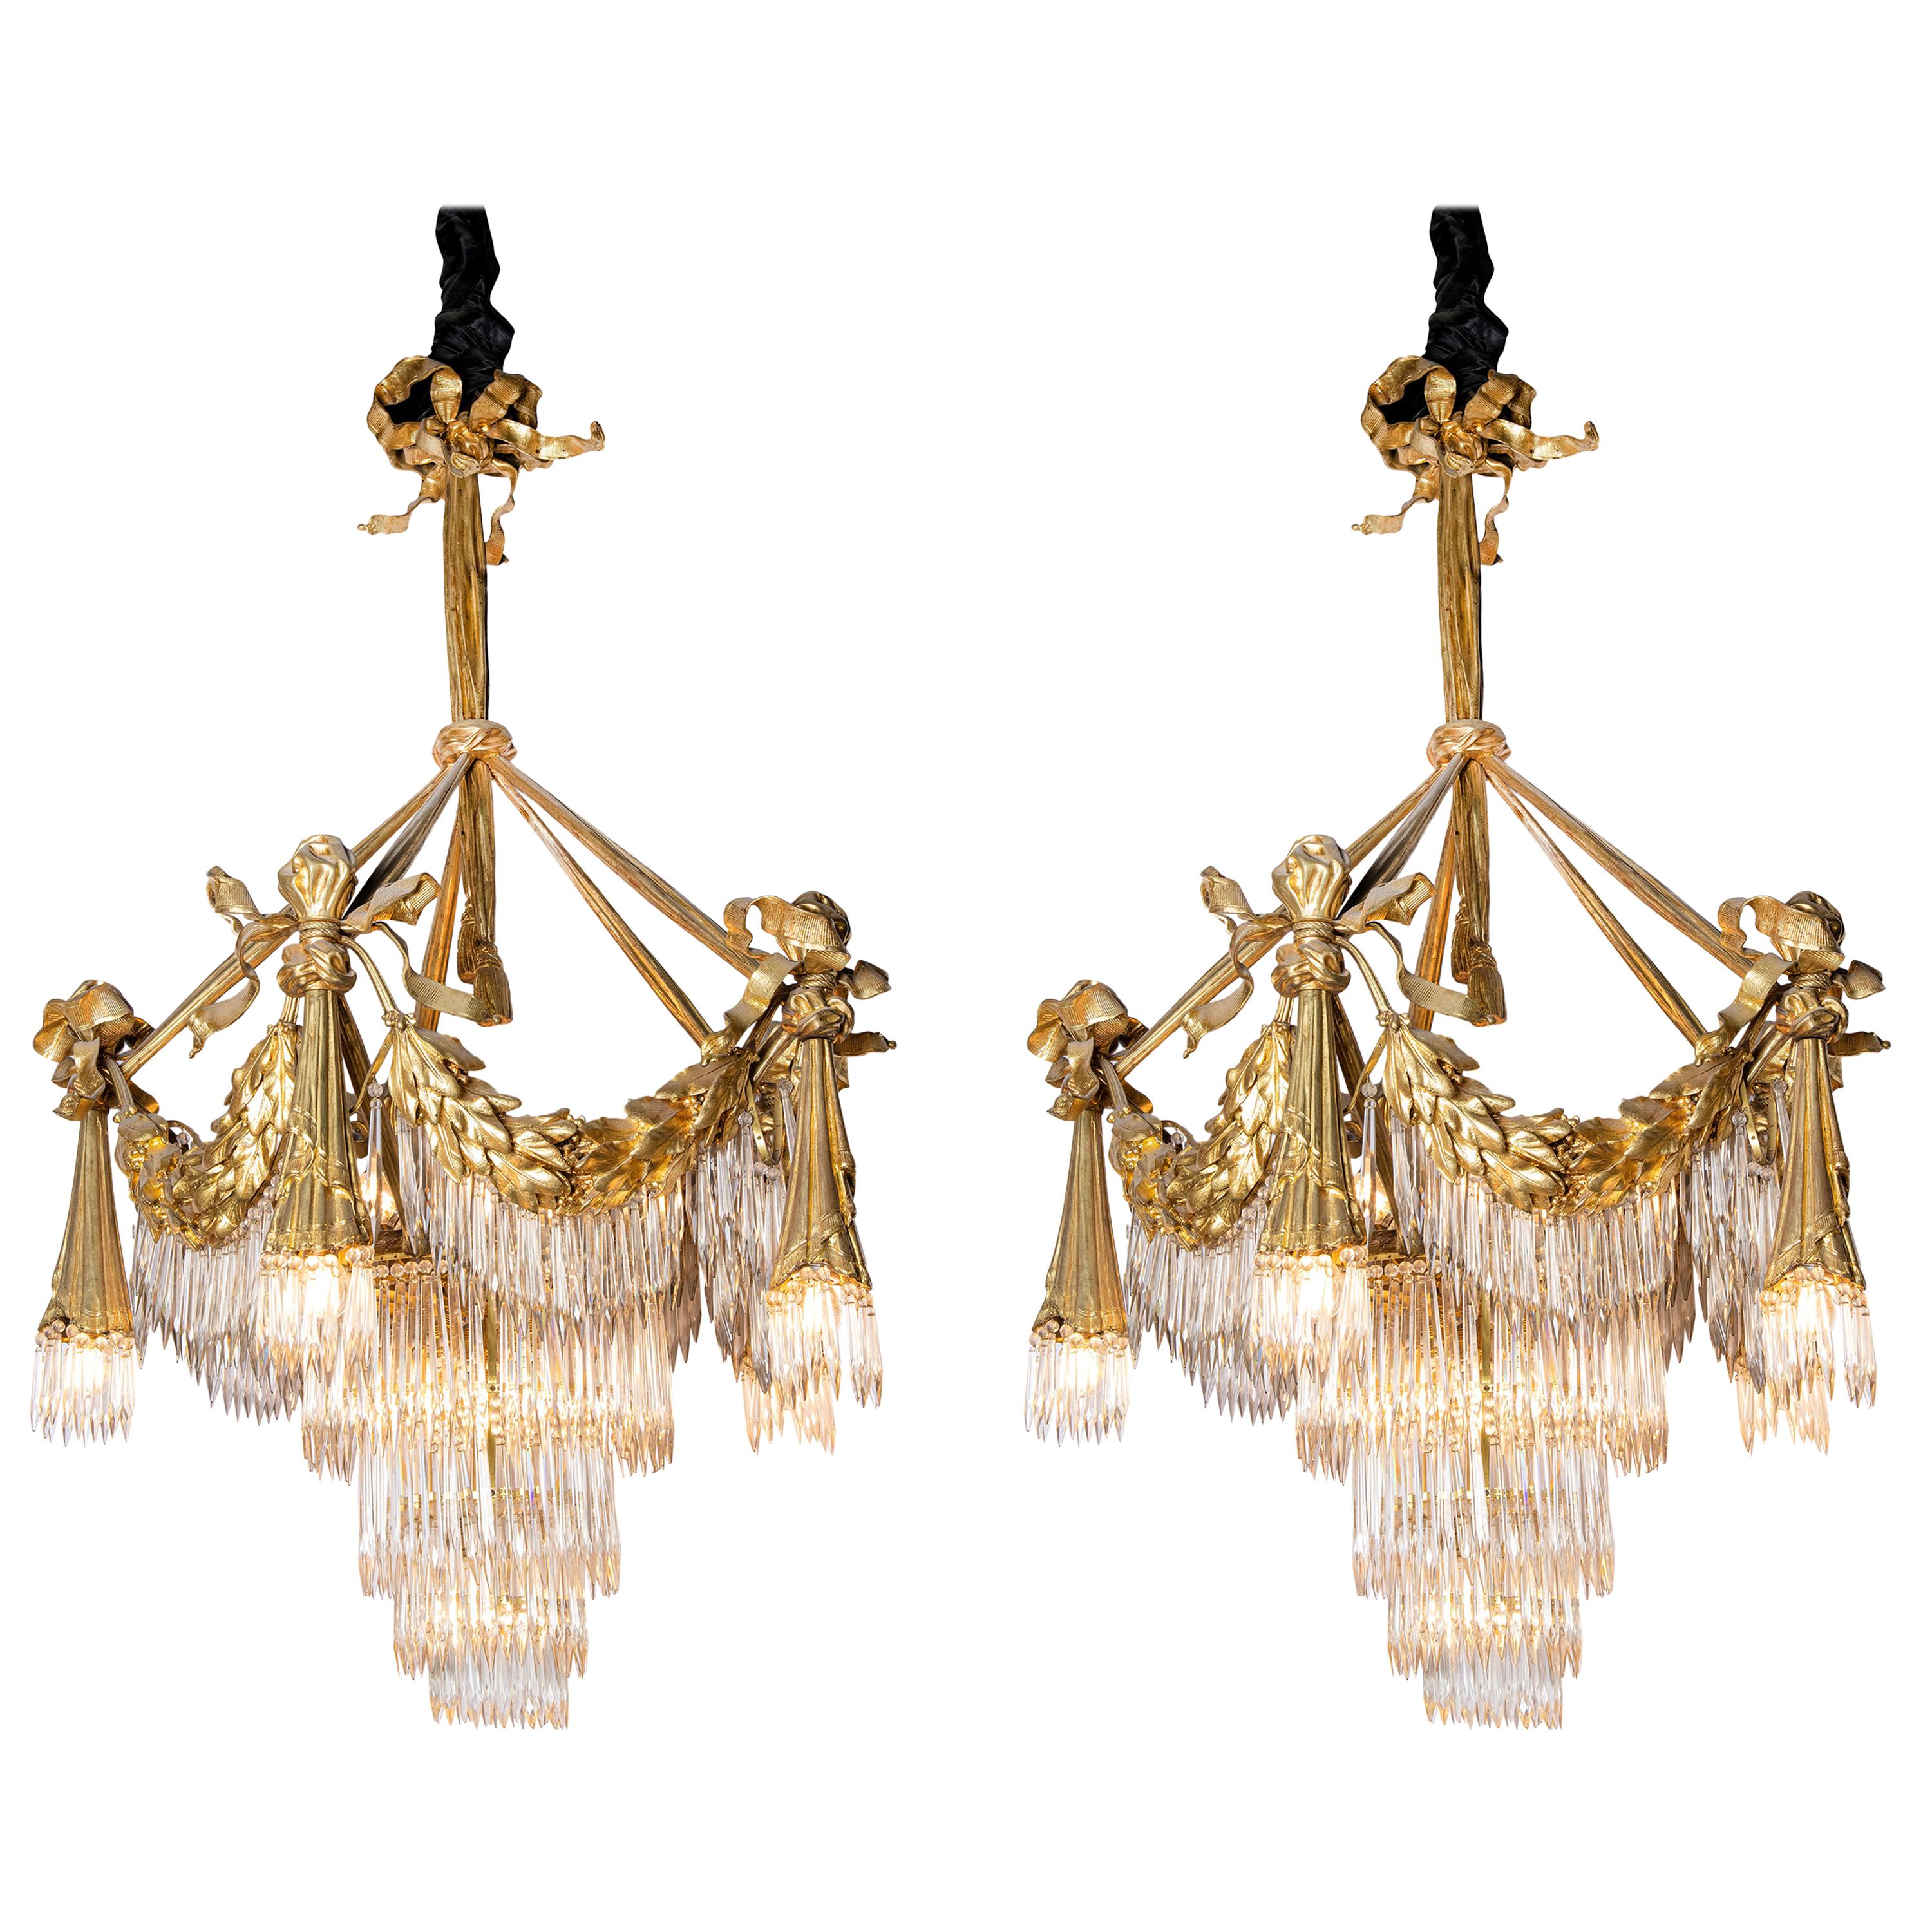 Pair of Ormolu Bronze and Baccarat Crystal Chandeliers, France, circa 1870